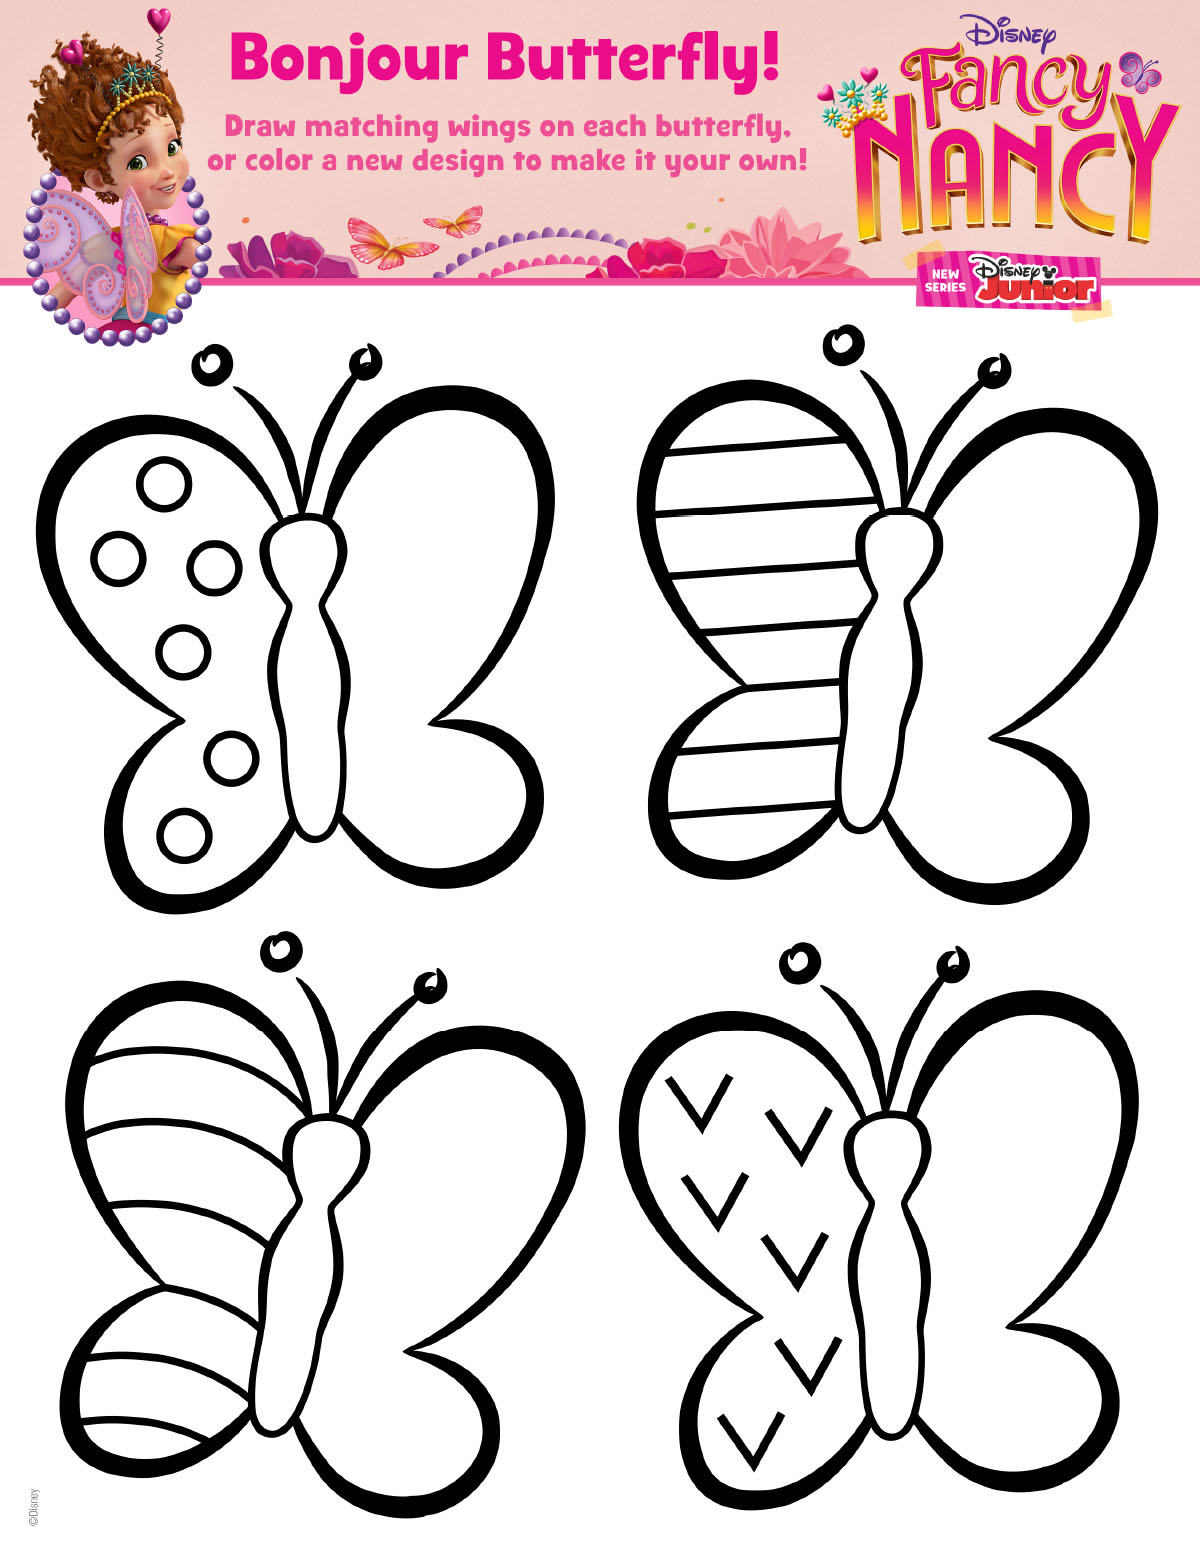 Disney.com Coloring Pages Fancy Nancy Butterfly Coloring Page Disney Family